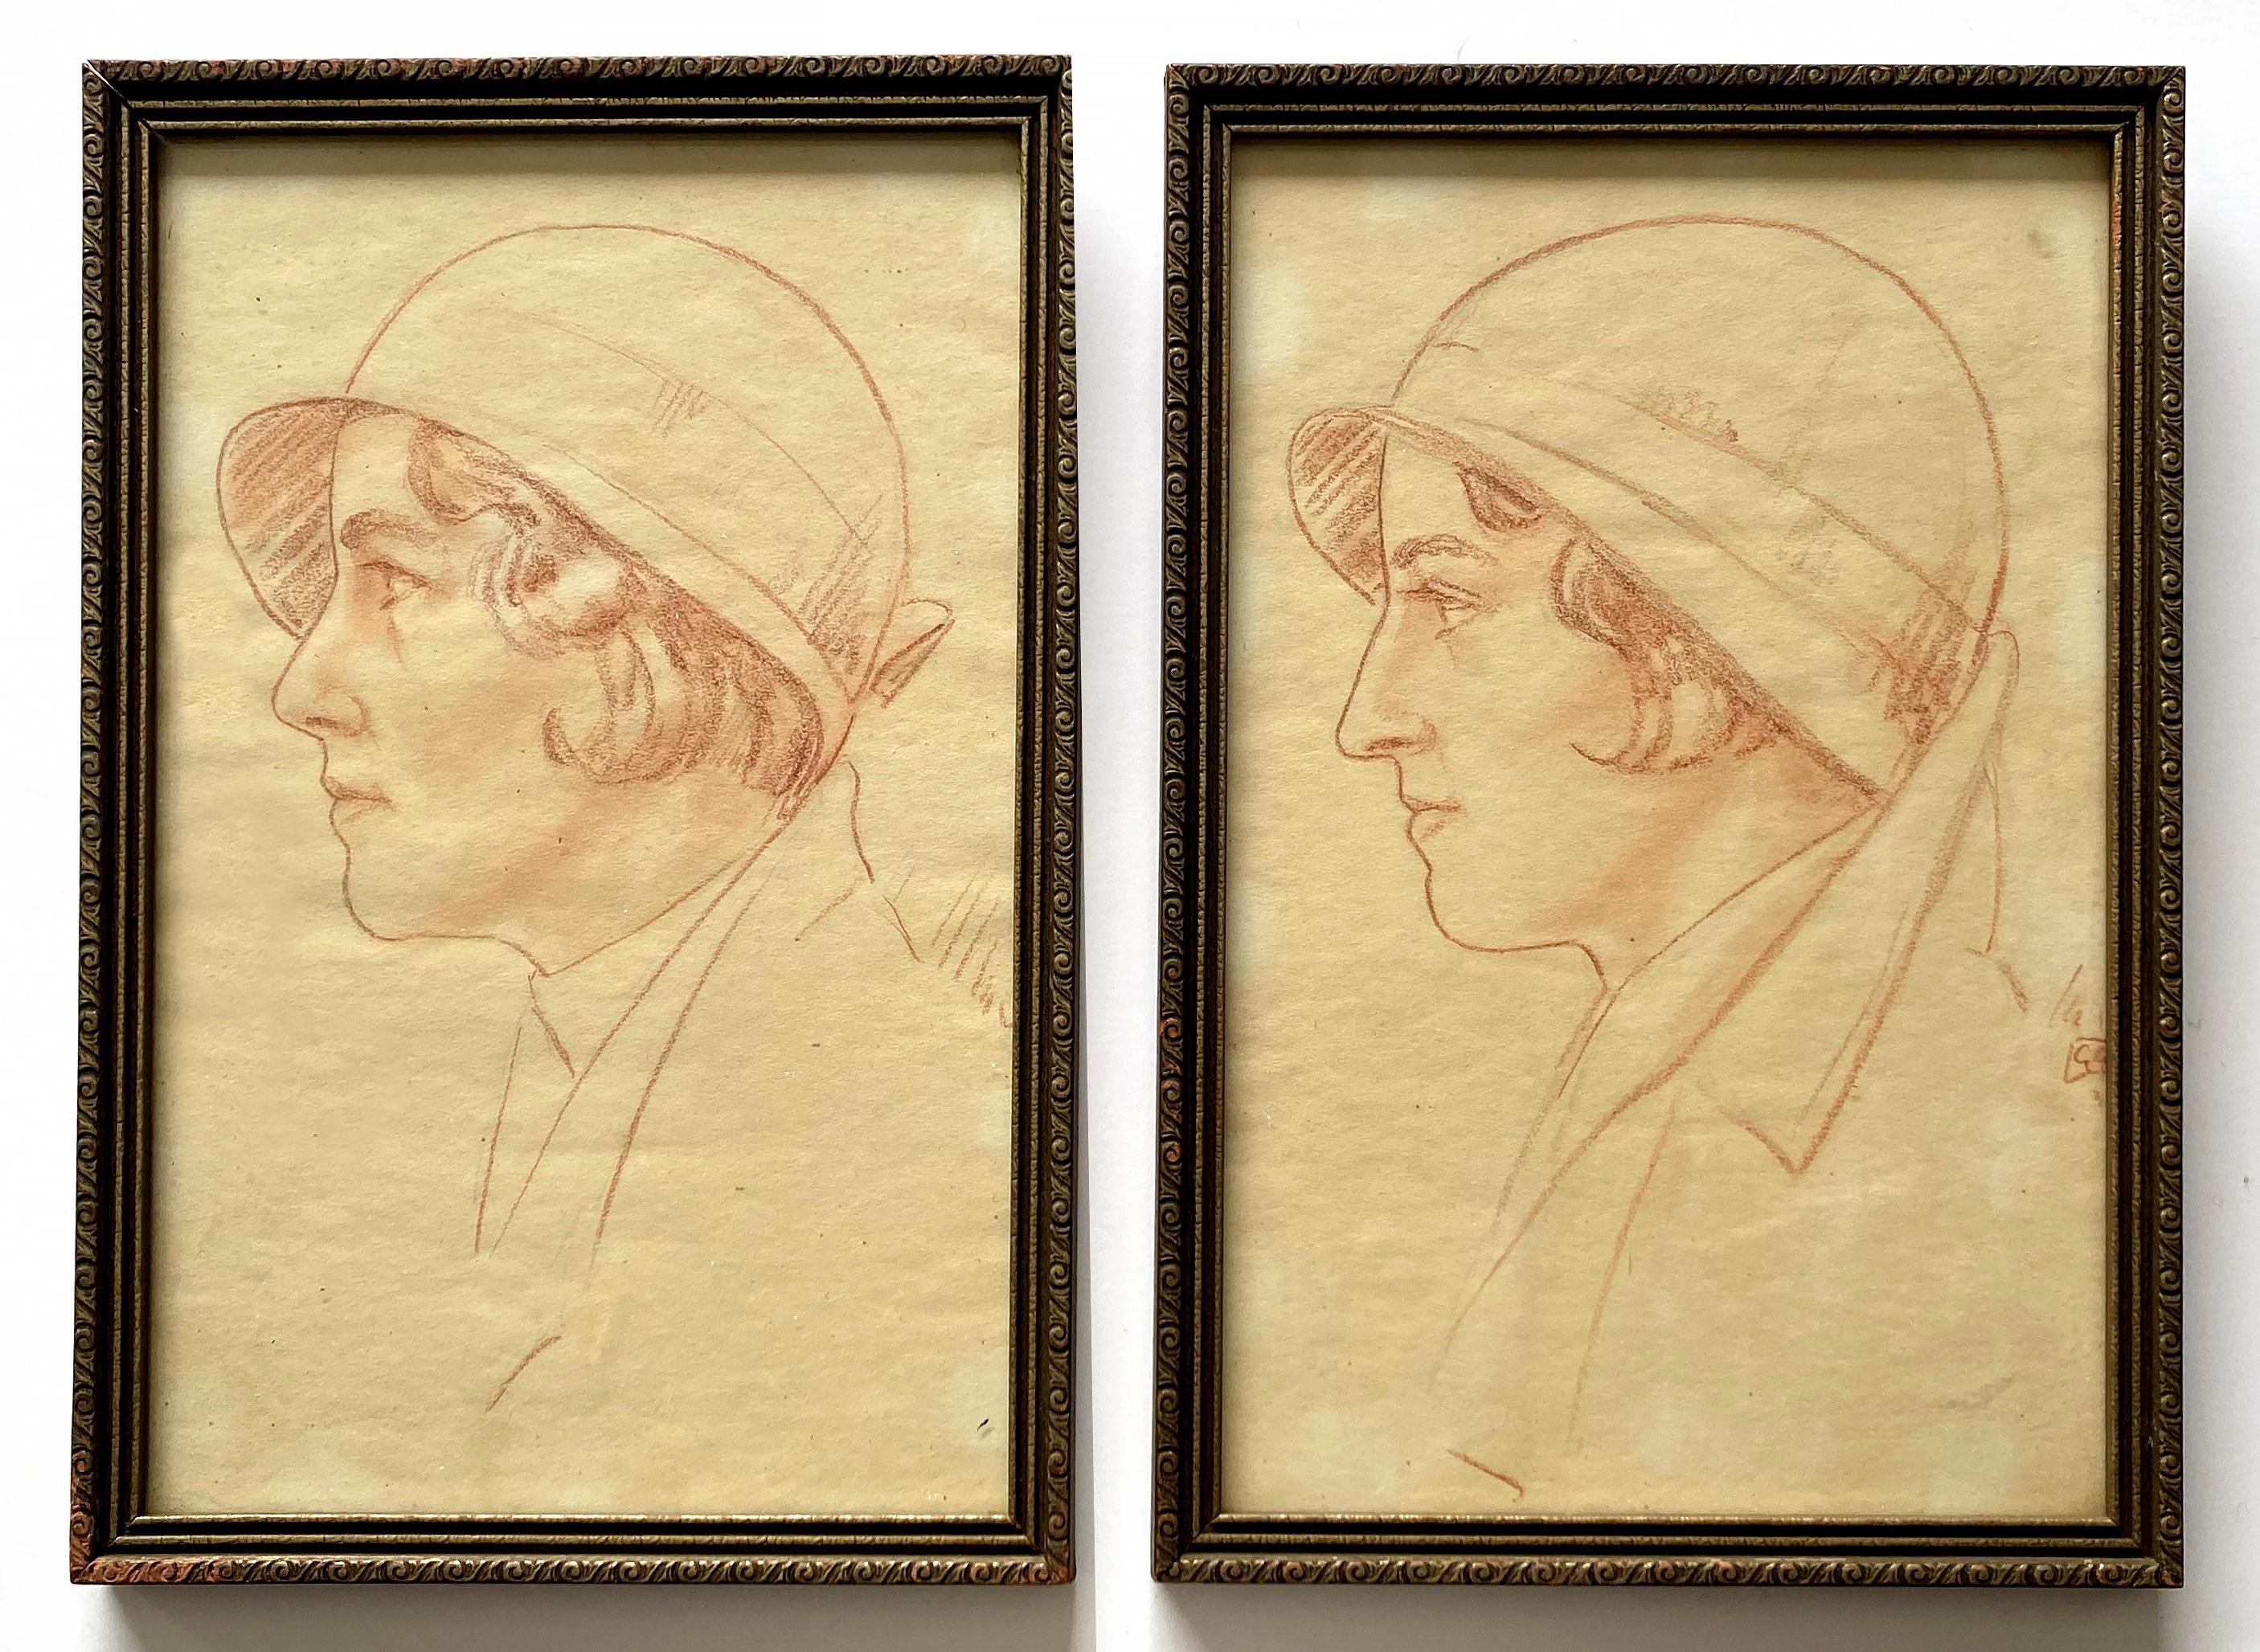 Pair of antique portraits women period clothes framed drawing red hats 19th